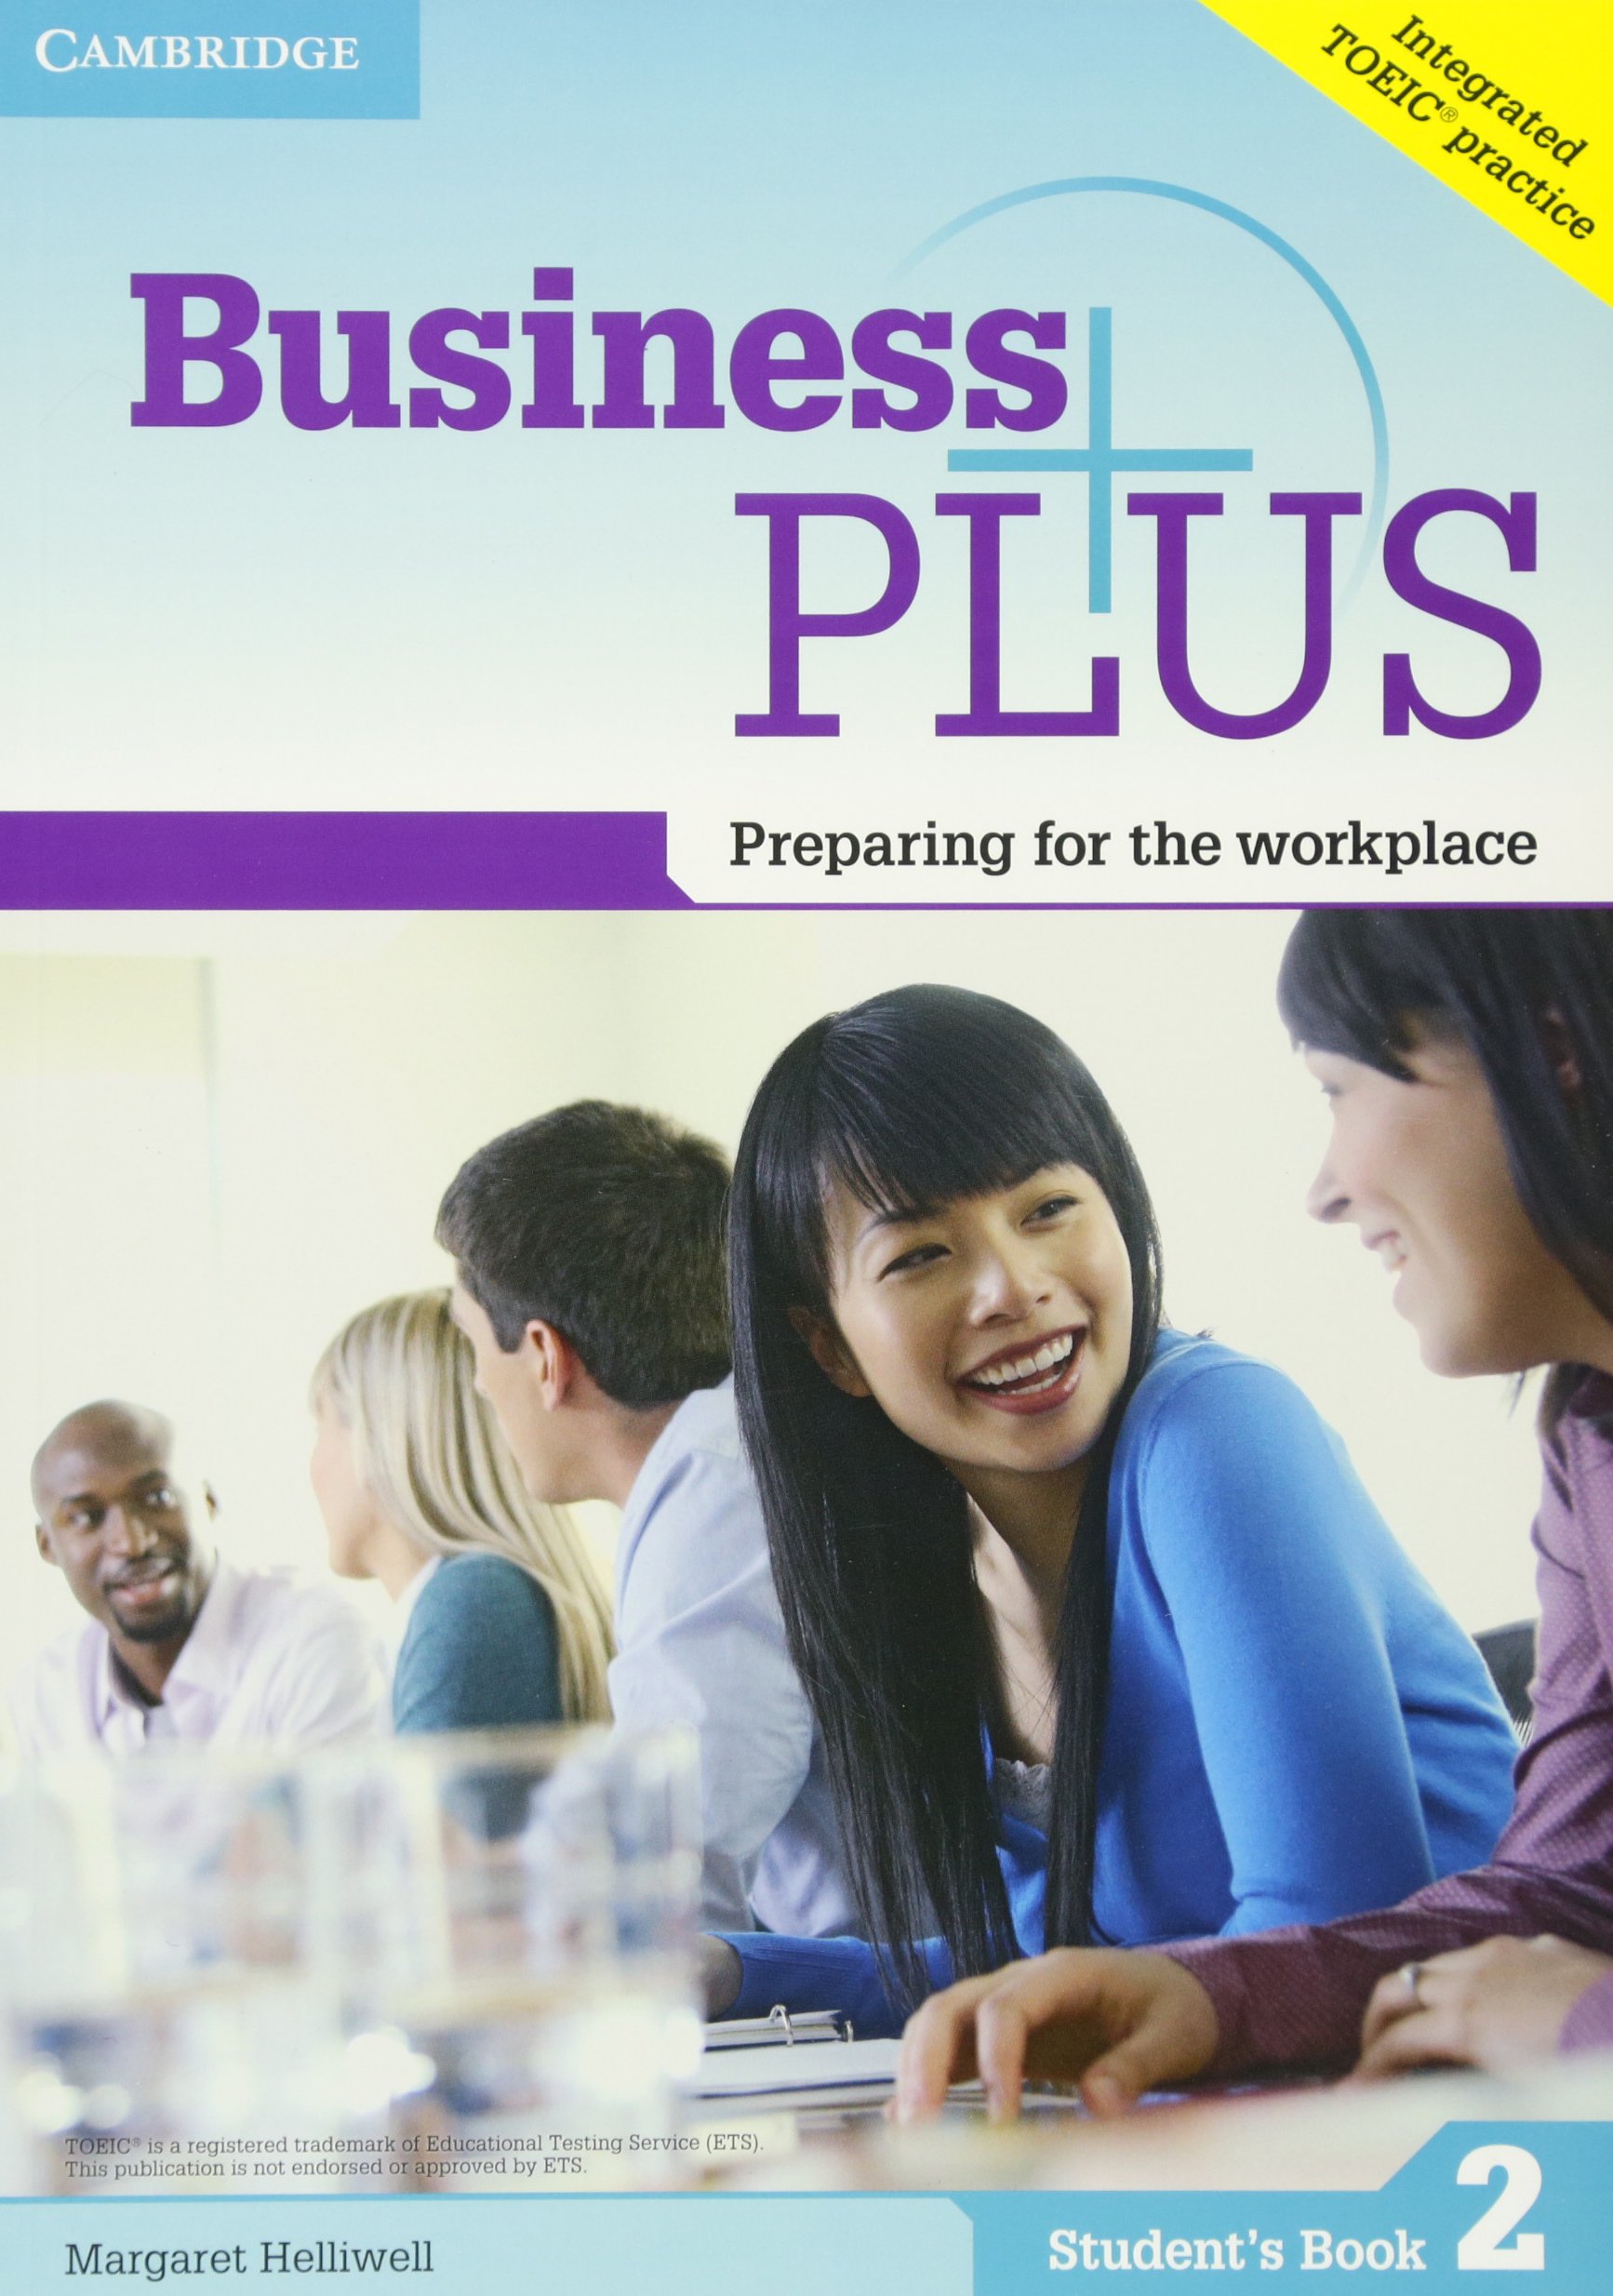 Business Plus Level 2 Student's Book: Preparing for the Workplace